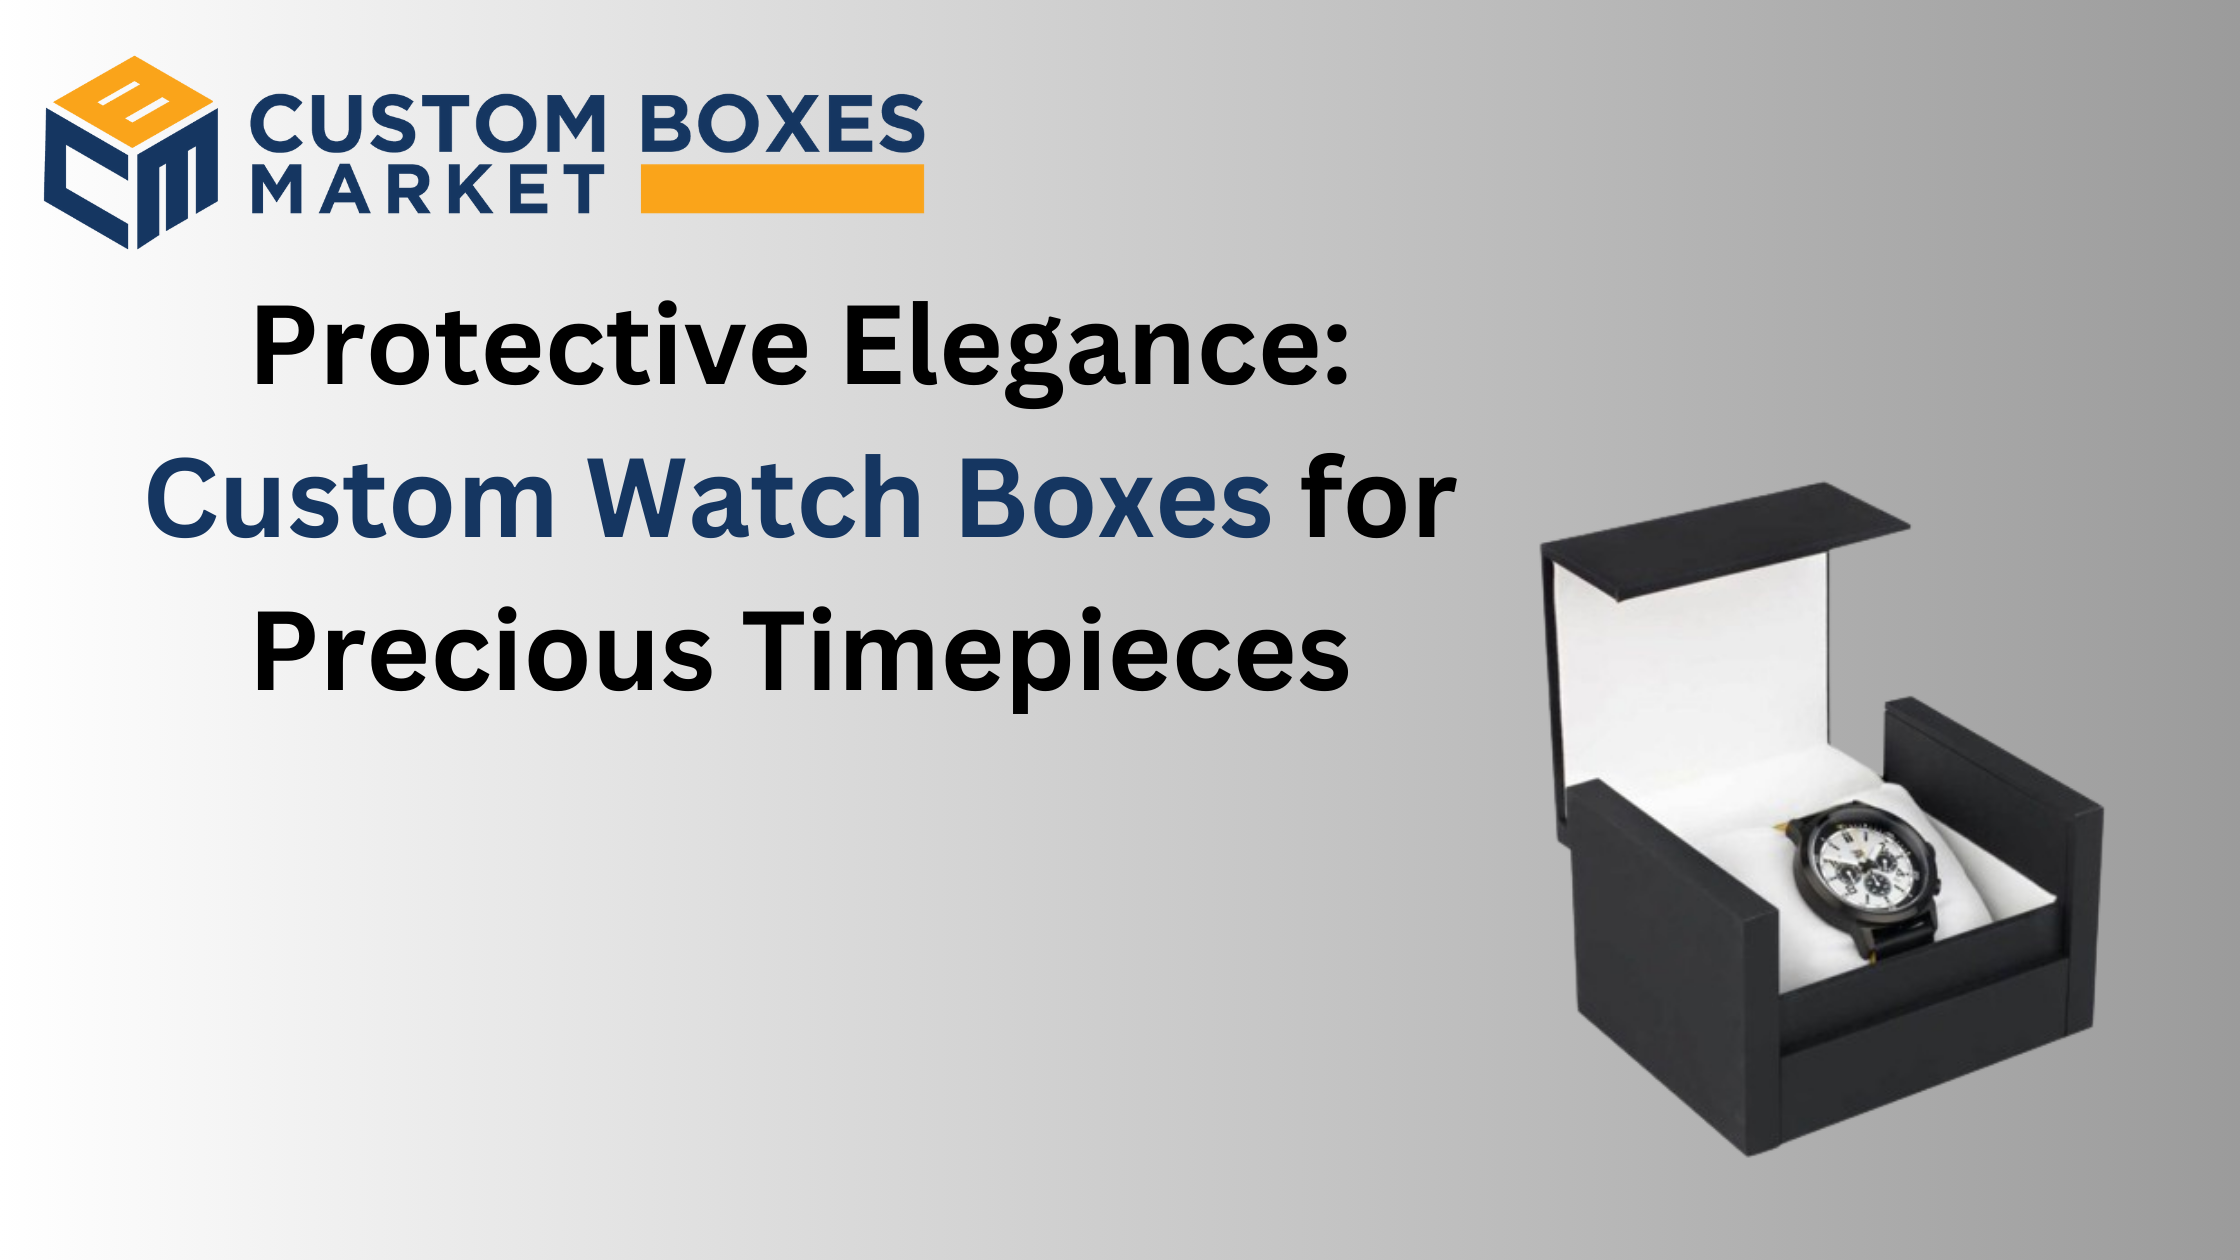 Protective Elegance: Custom Watch Boxes for Precious Timepieces